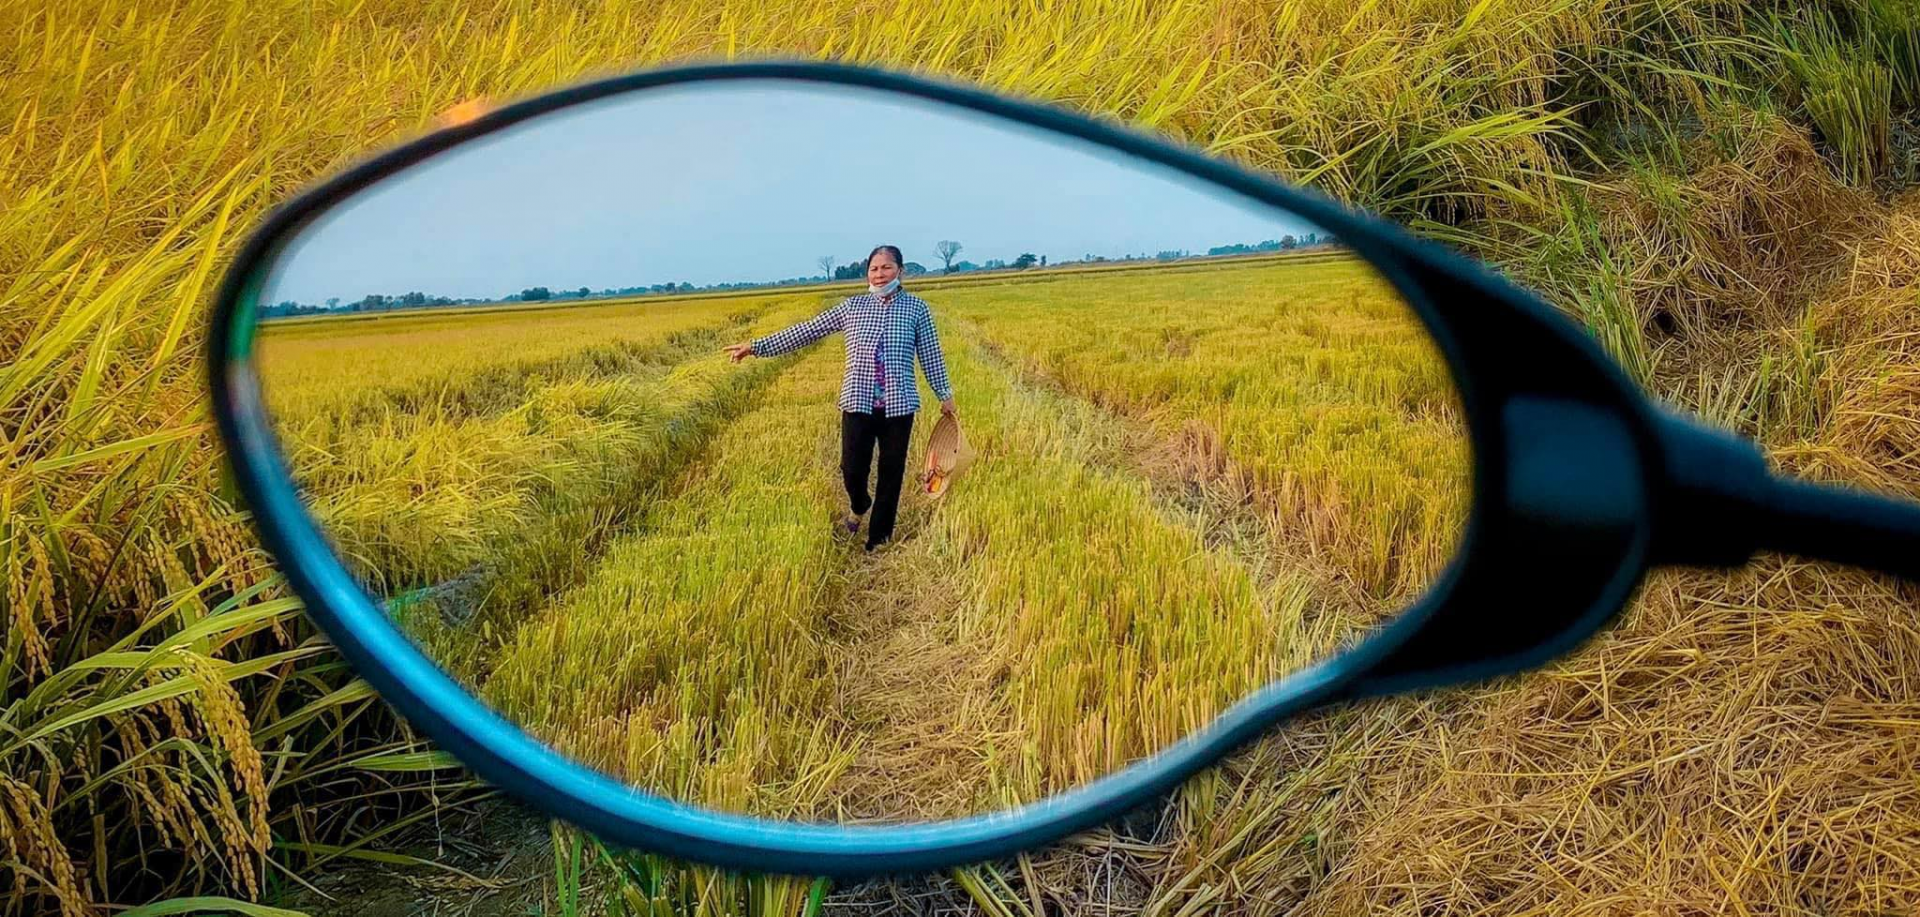 Young man captures his hometown through rear-view mirror